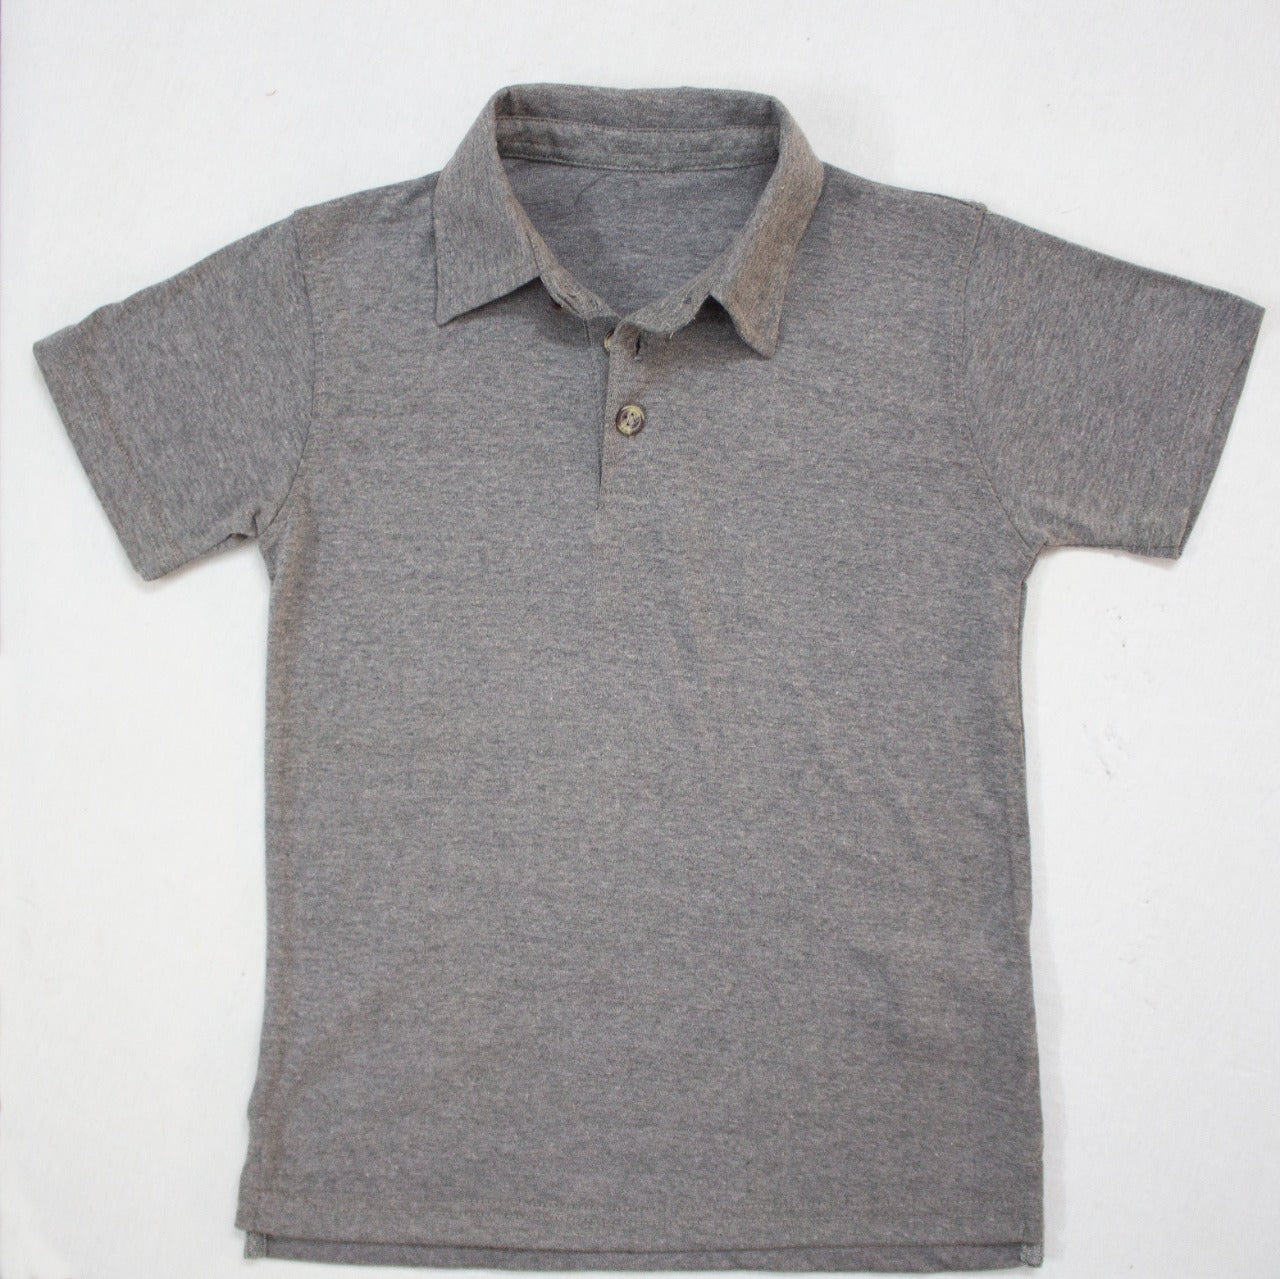 Kids Polo Shirts | Dark Grey Polo Shirt For Kids By: Donny Feathers